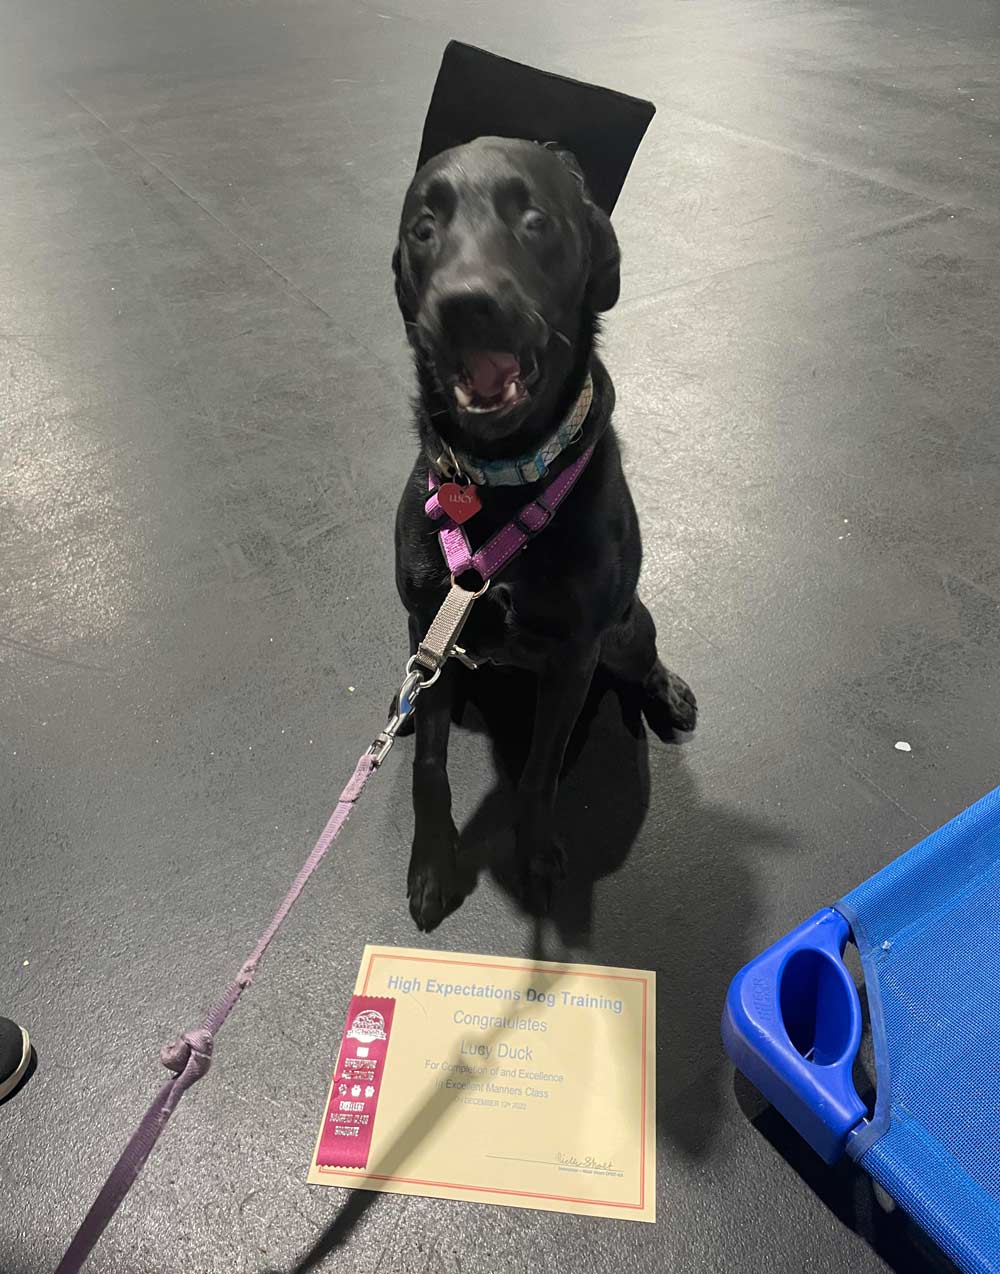 Our Puppy’s Graduation from training photo. We are so proud